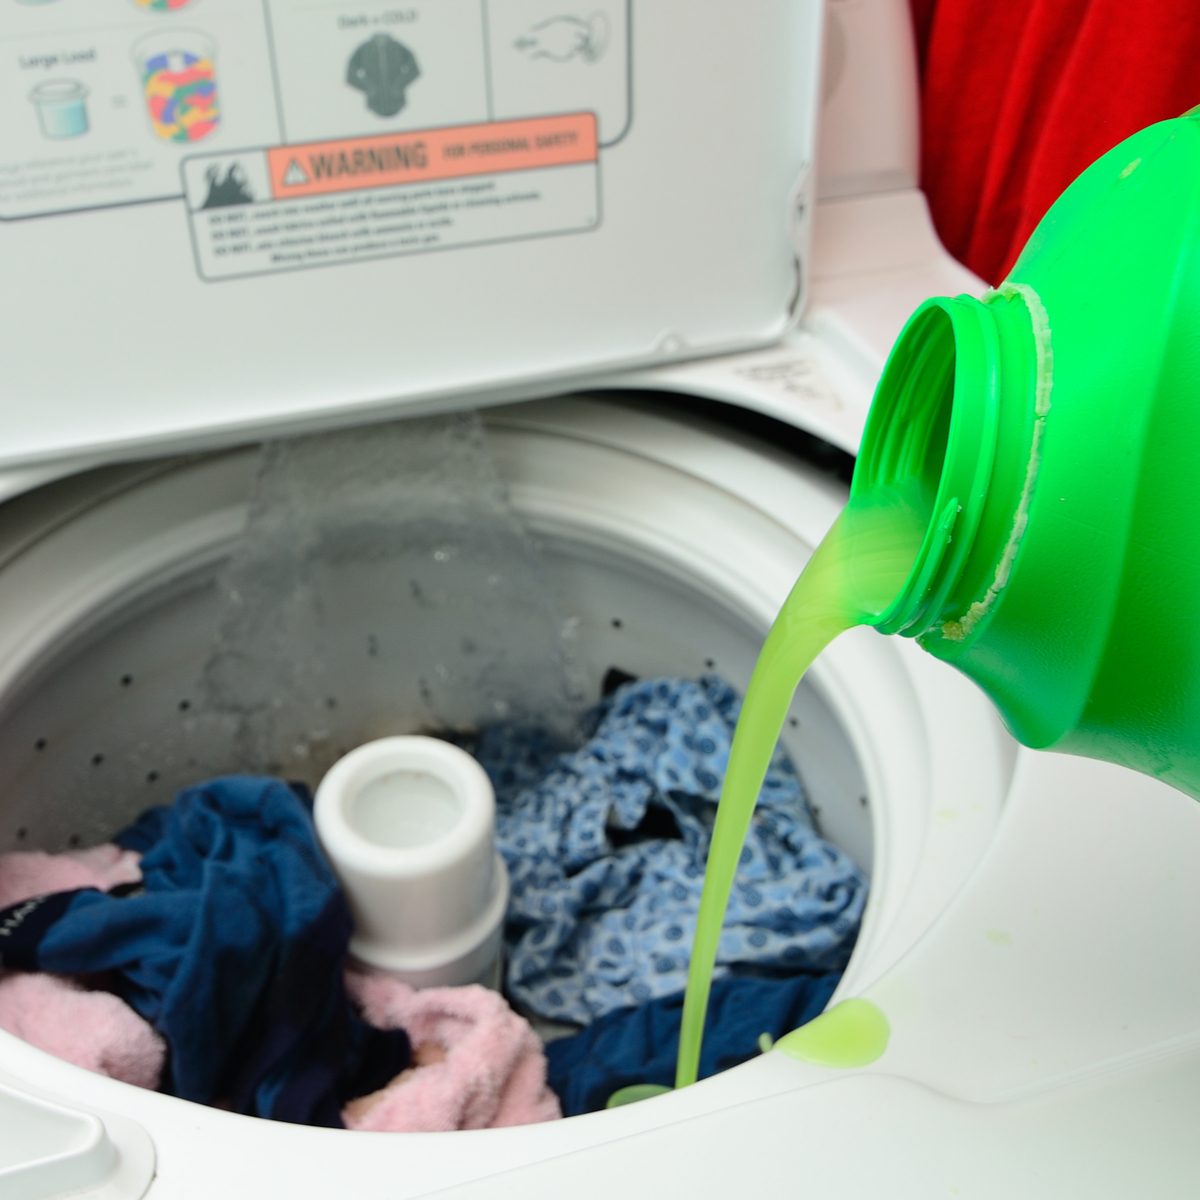 Pouring laundry detergent into washing machine